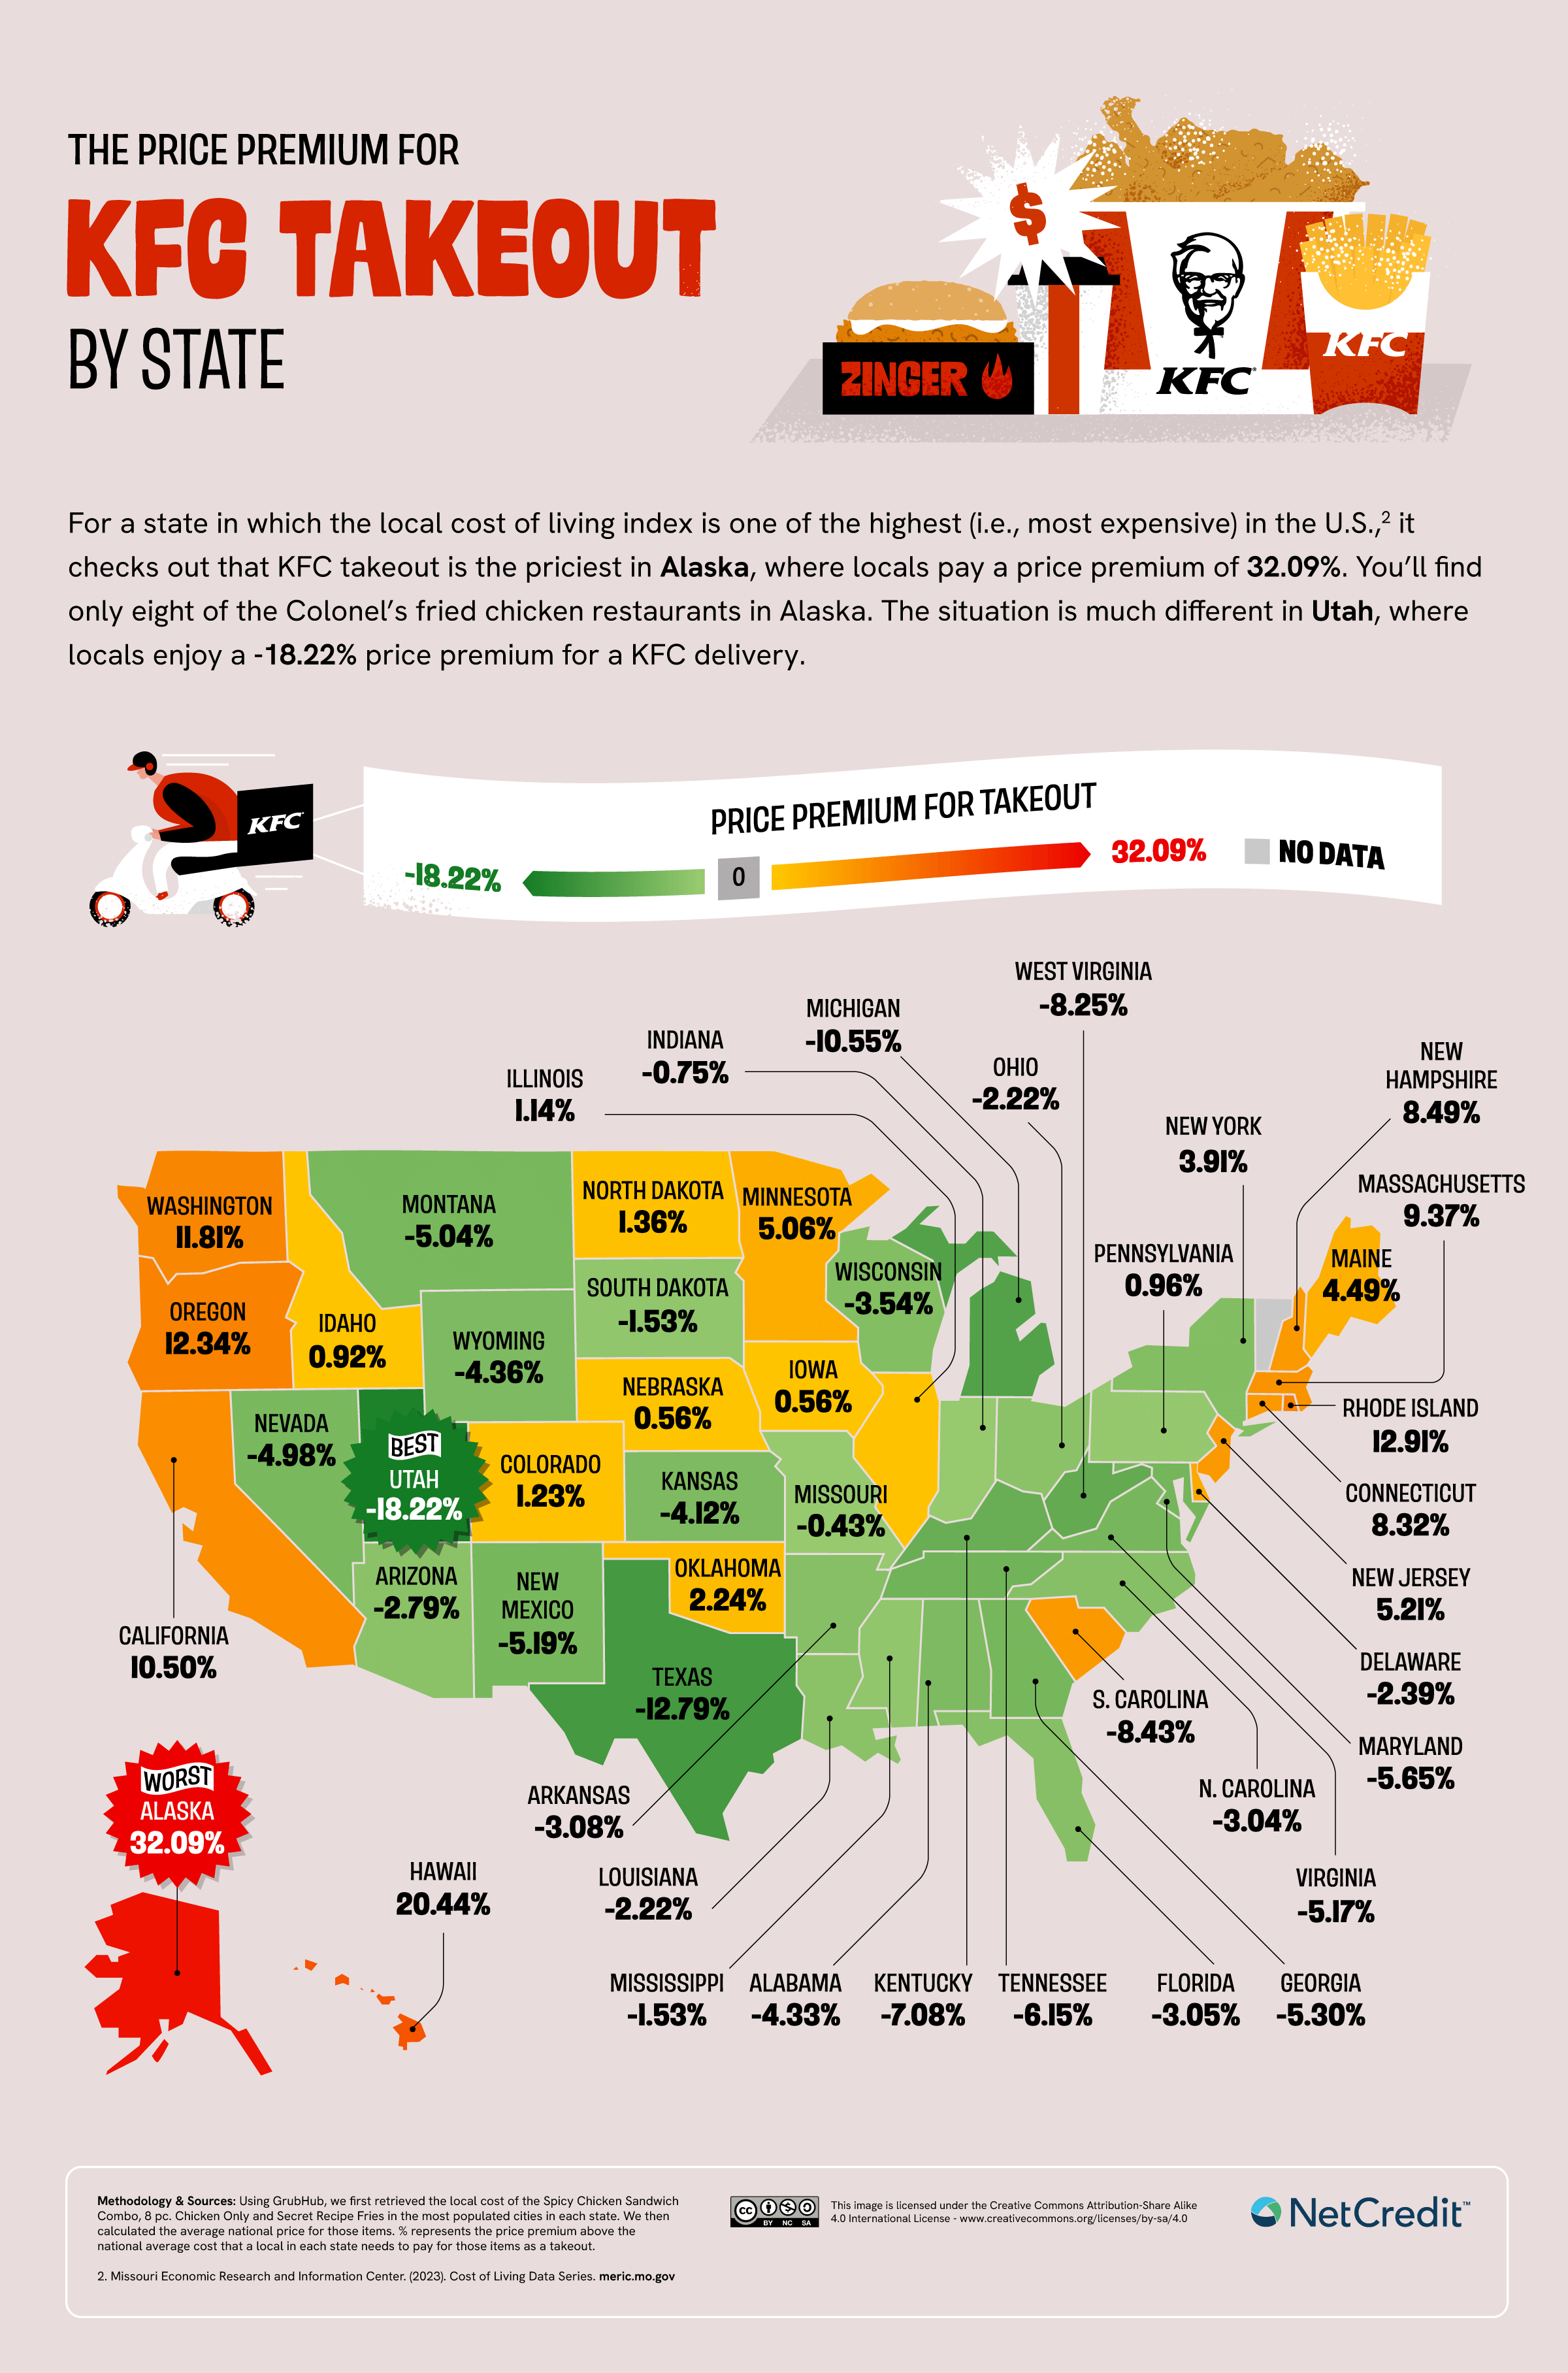 Infographic of prices for KFC takeout by state.